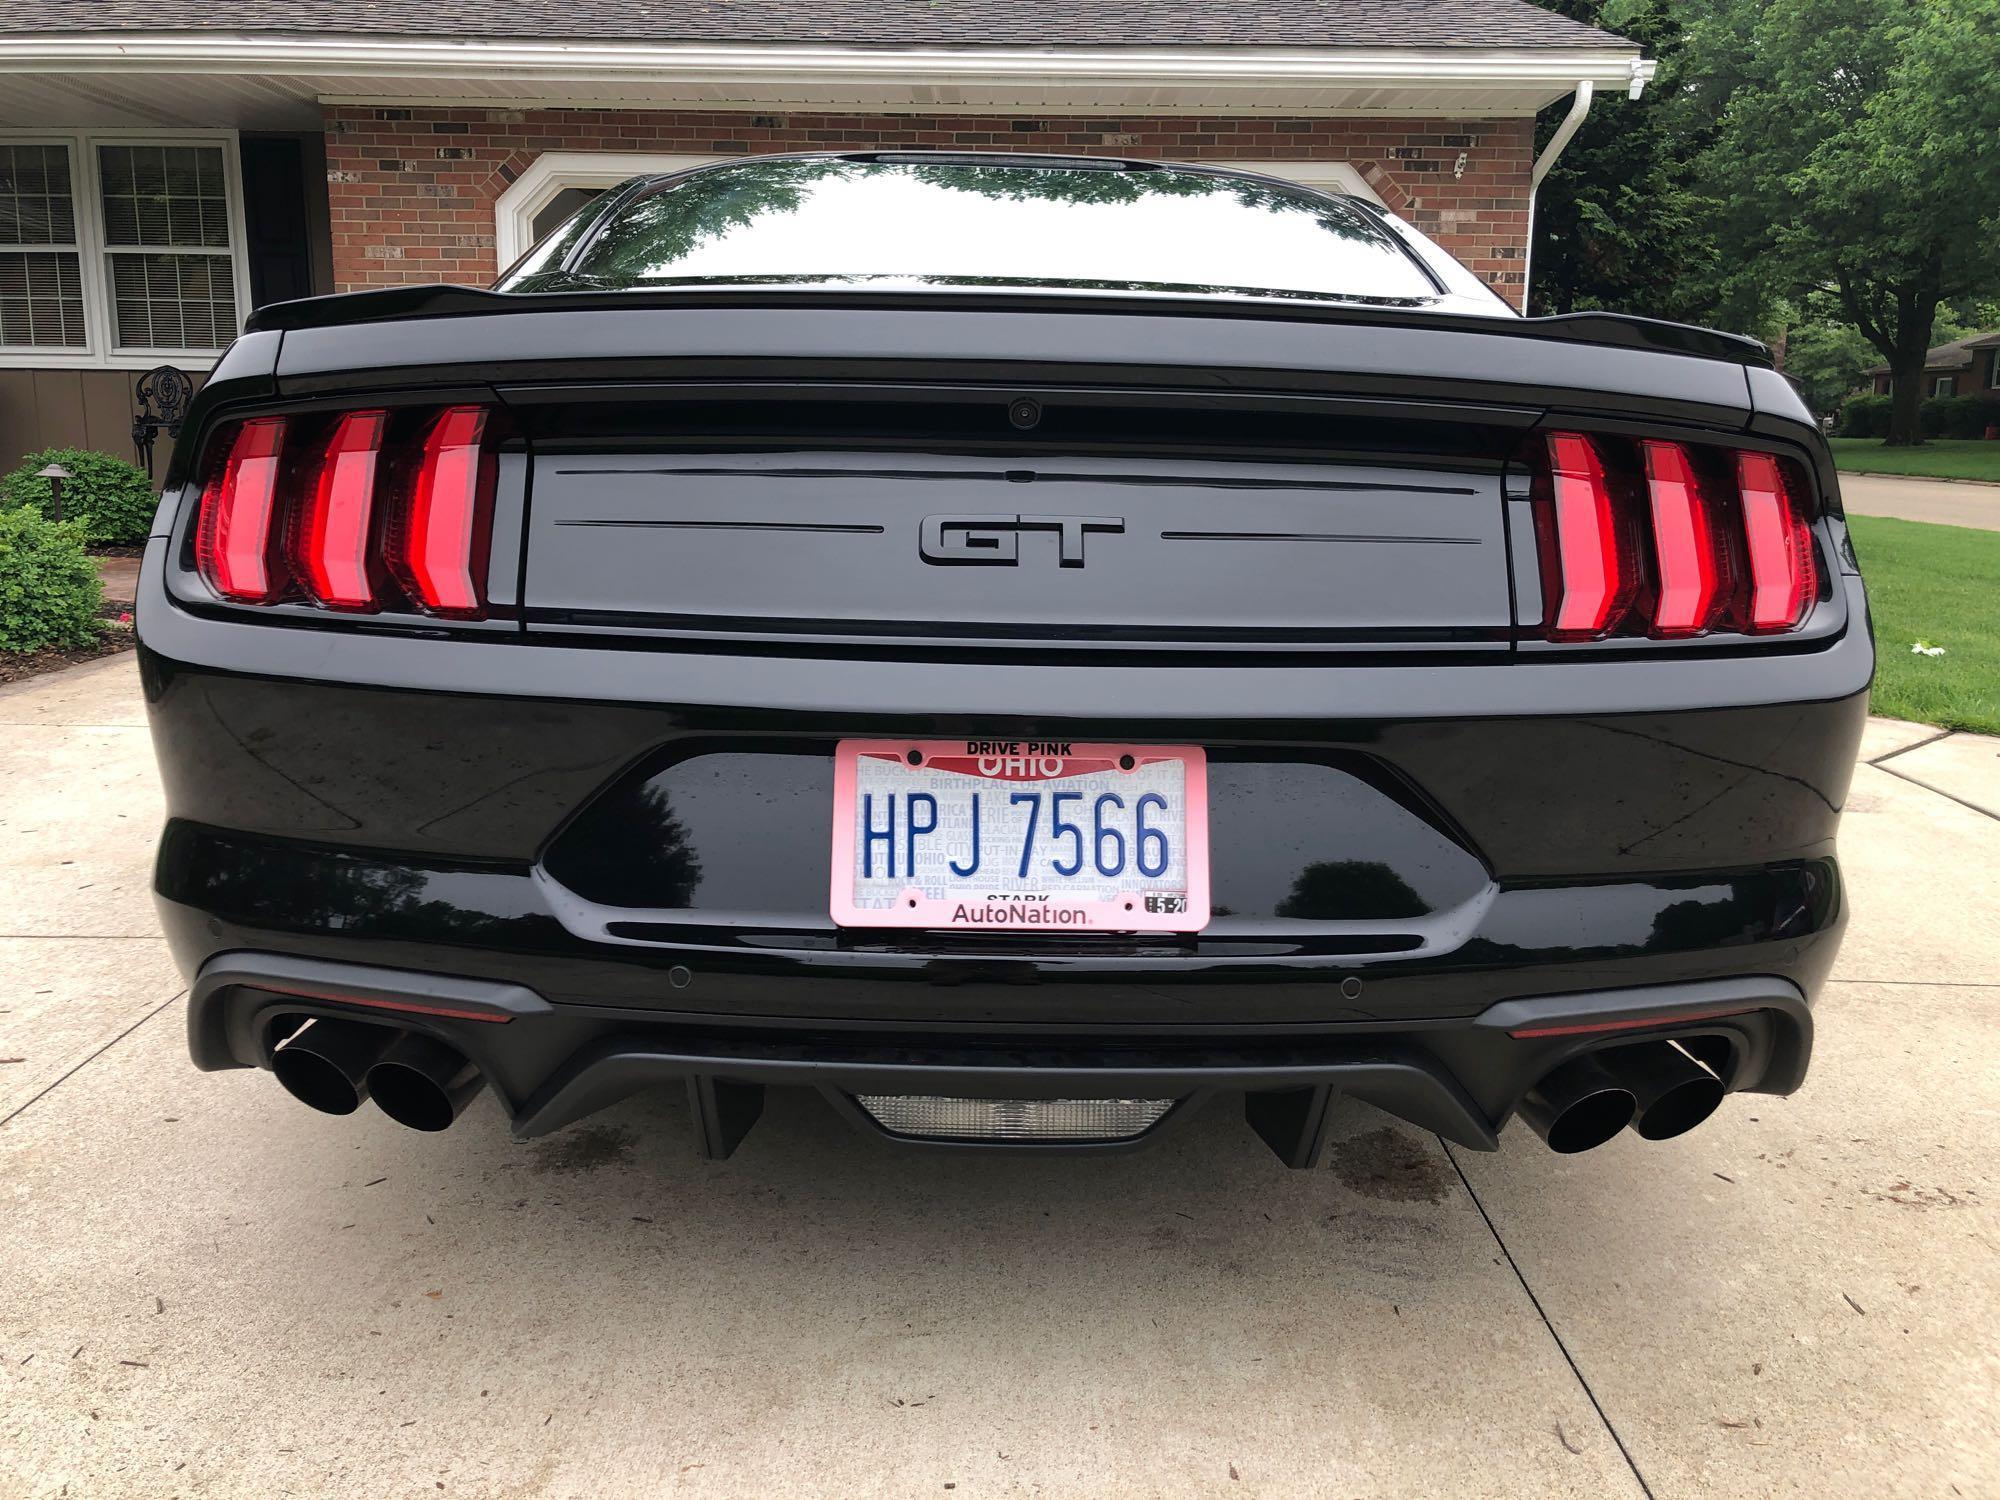 2018 Ford Mustang GT 5.0, one owner, 3,645 mi., 6 speed